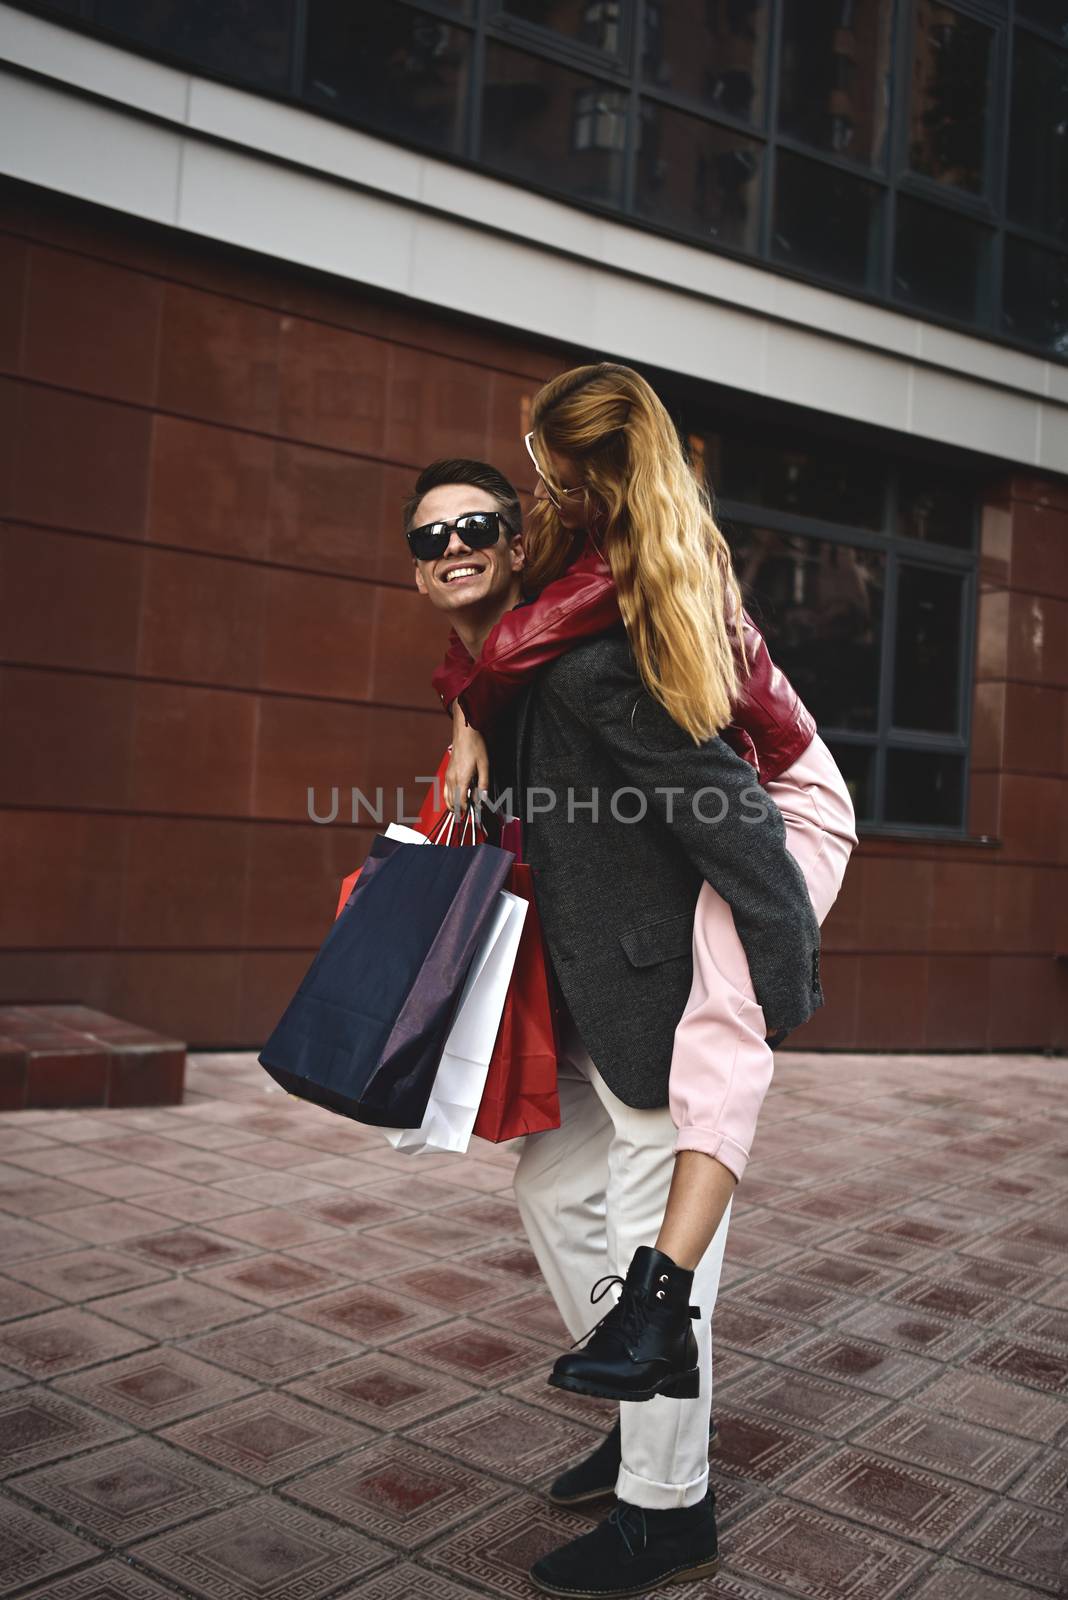 Happy couple shopping together and having fun. Boyfriend carrying his girlfriend on the piggyback.